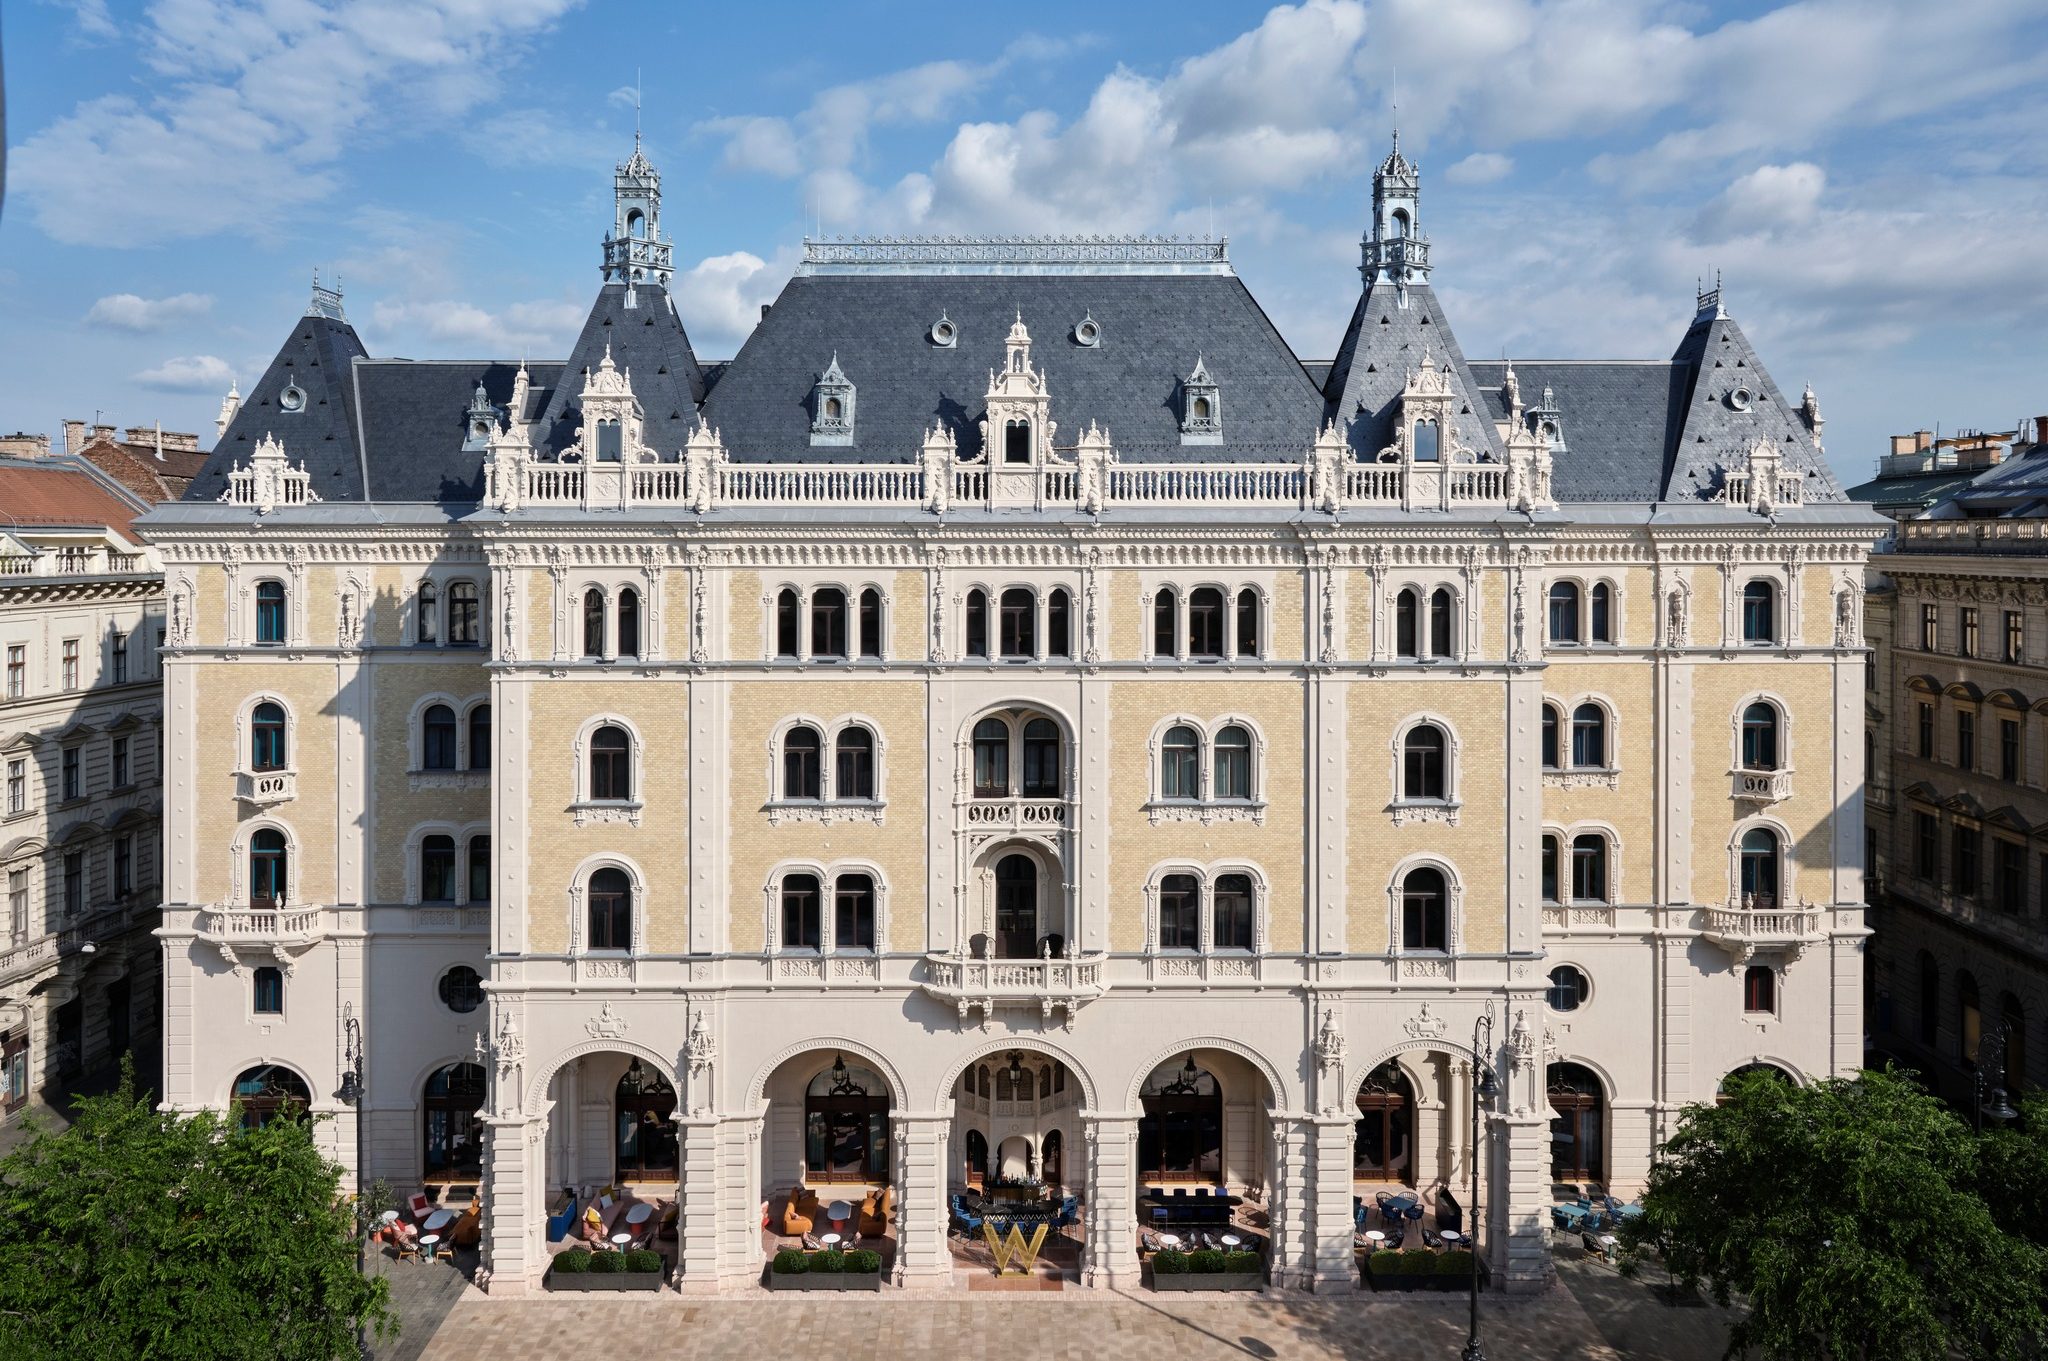 Vacant for Twenty Years, a Legendary Building Is Now a Luxury Hotel